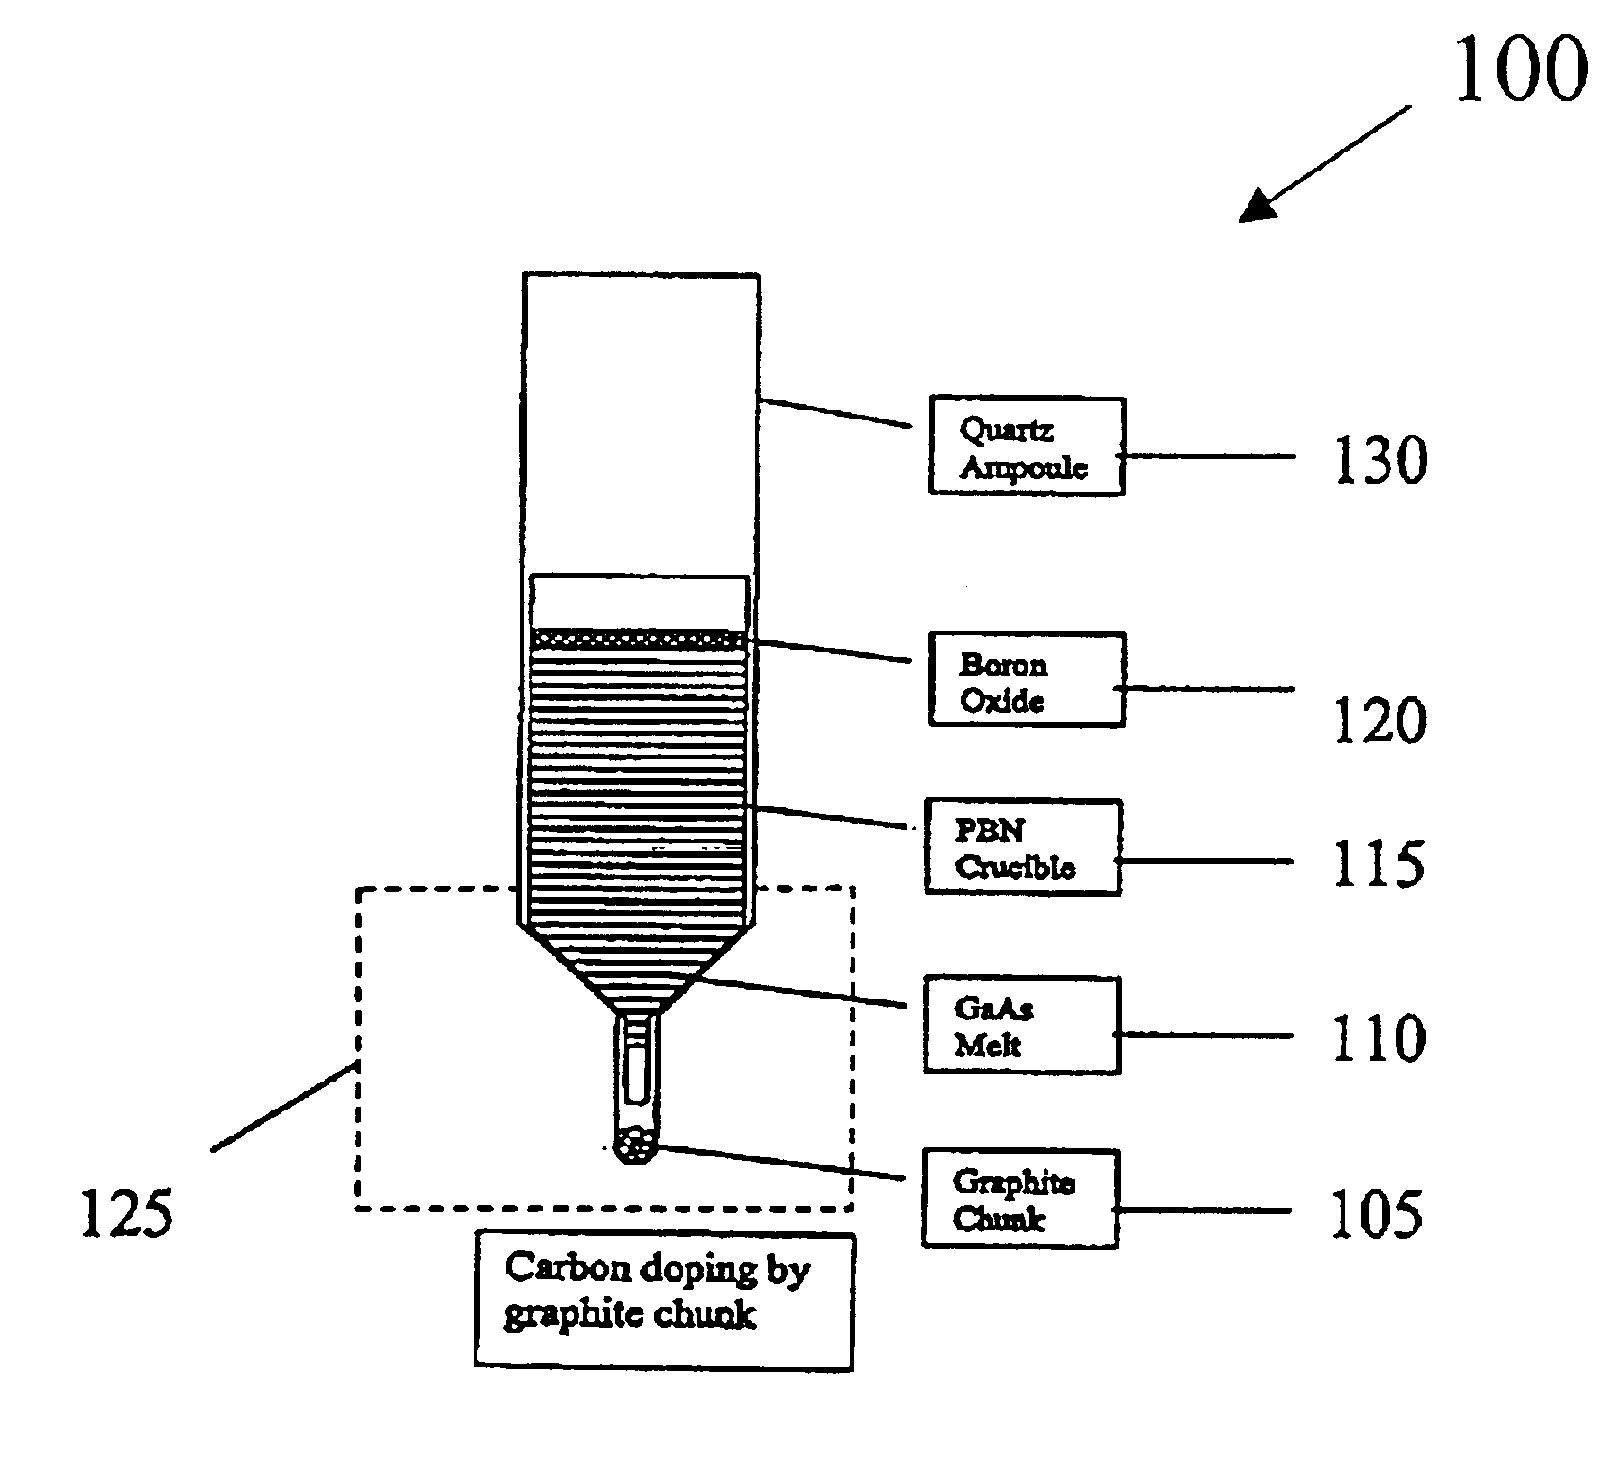 Method and apparatus for growing semiconductor crystals with a rigid support with carbon doping and resistivity control and thermal gradient control